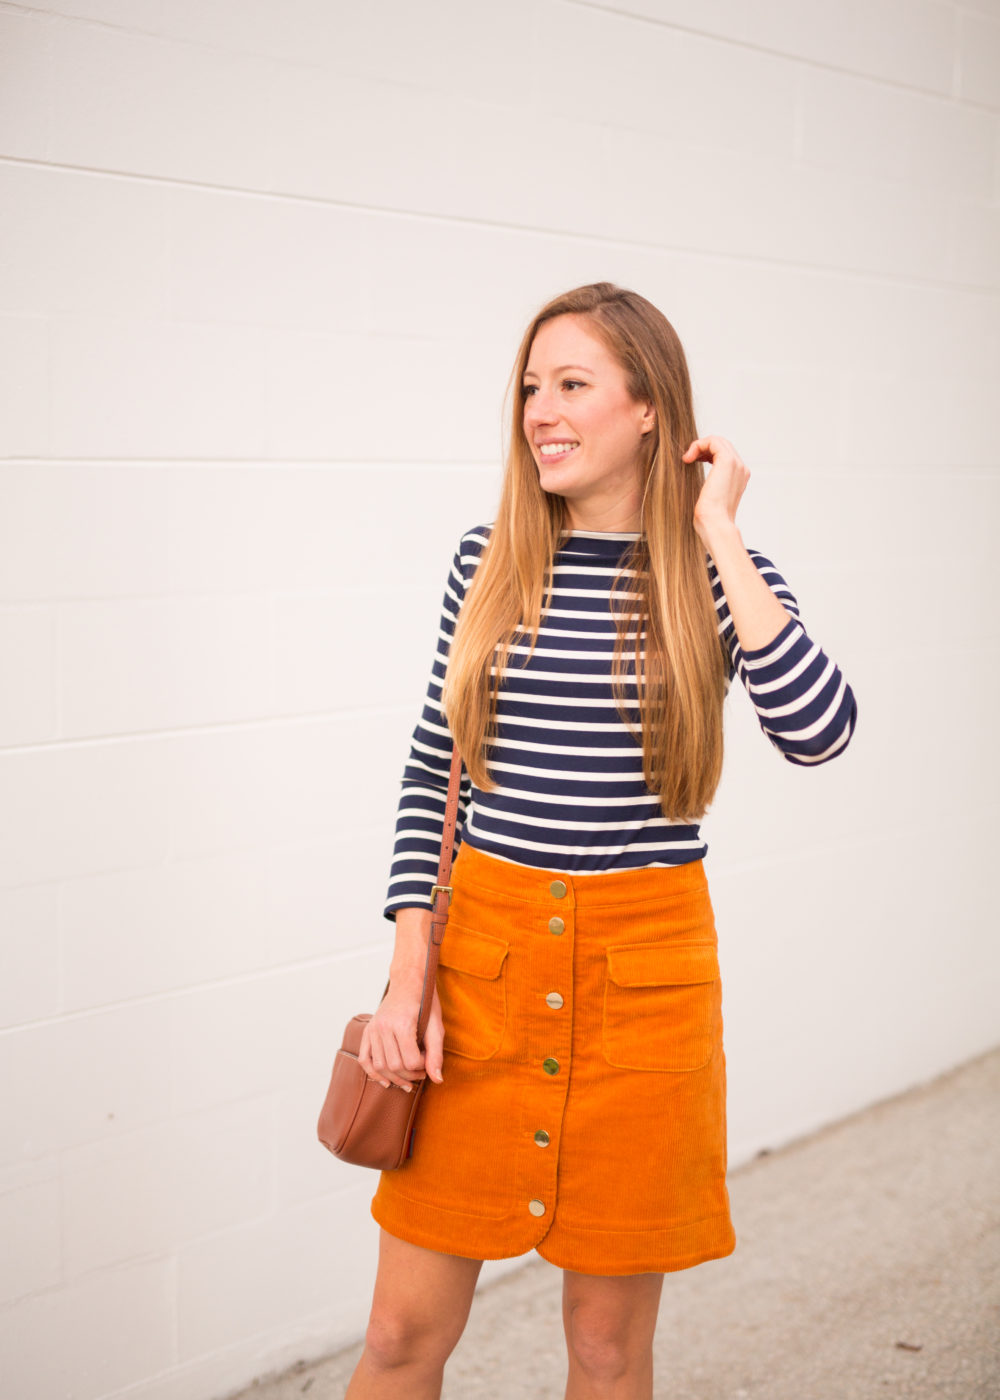 4 Must Have Fall Wardrobe Staples - Striped Shirt, Corduroy Skirt, Ankle Booties and Leather Bag | Sunshine Style